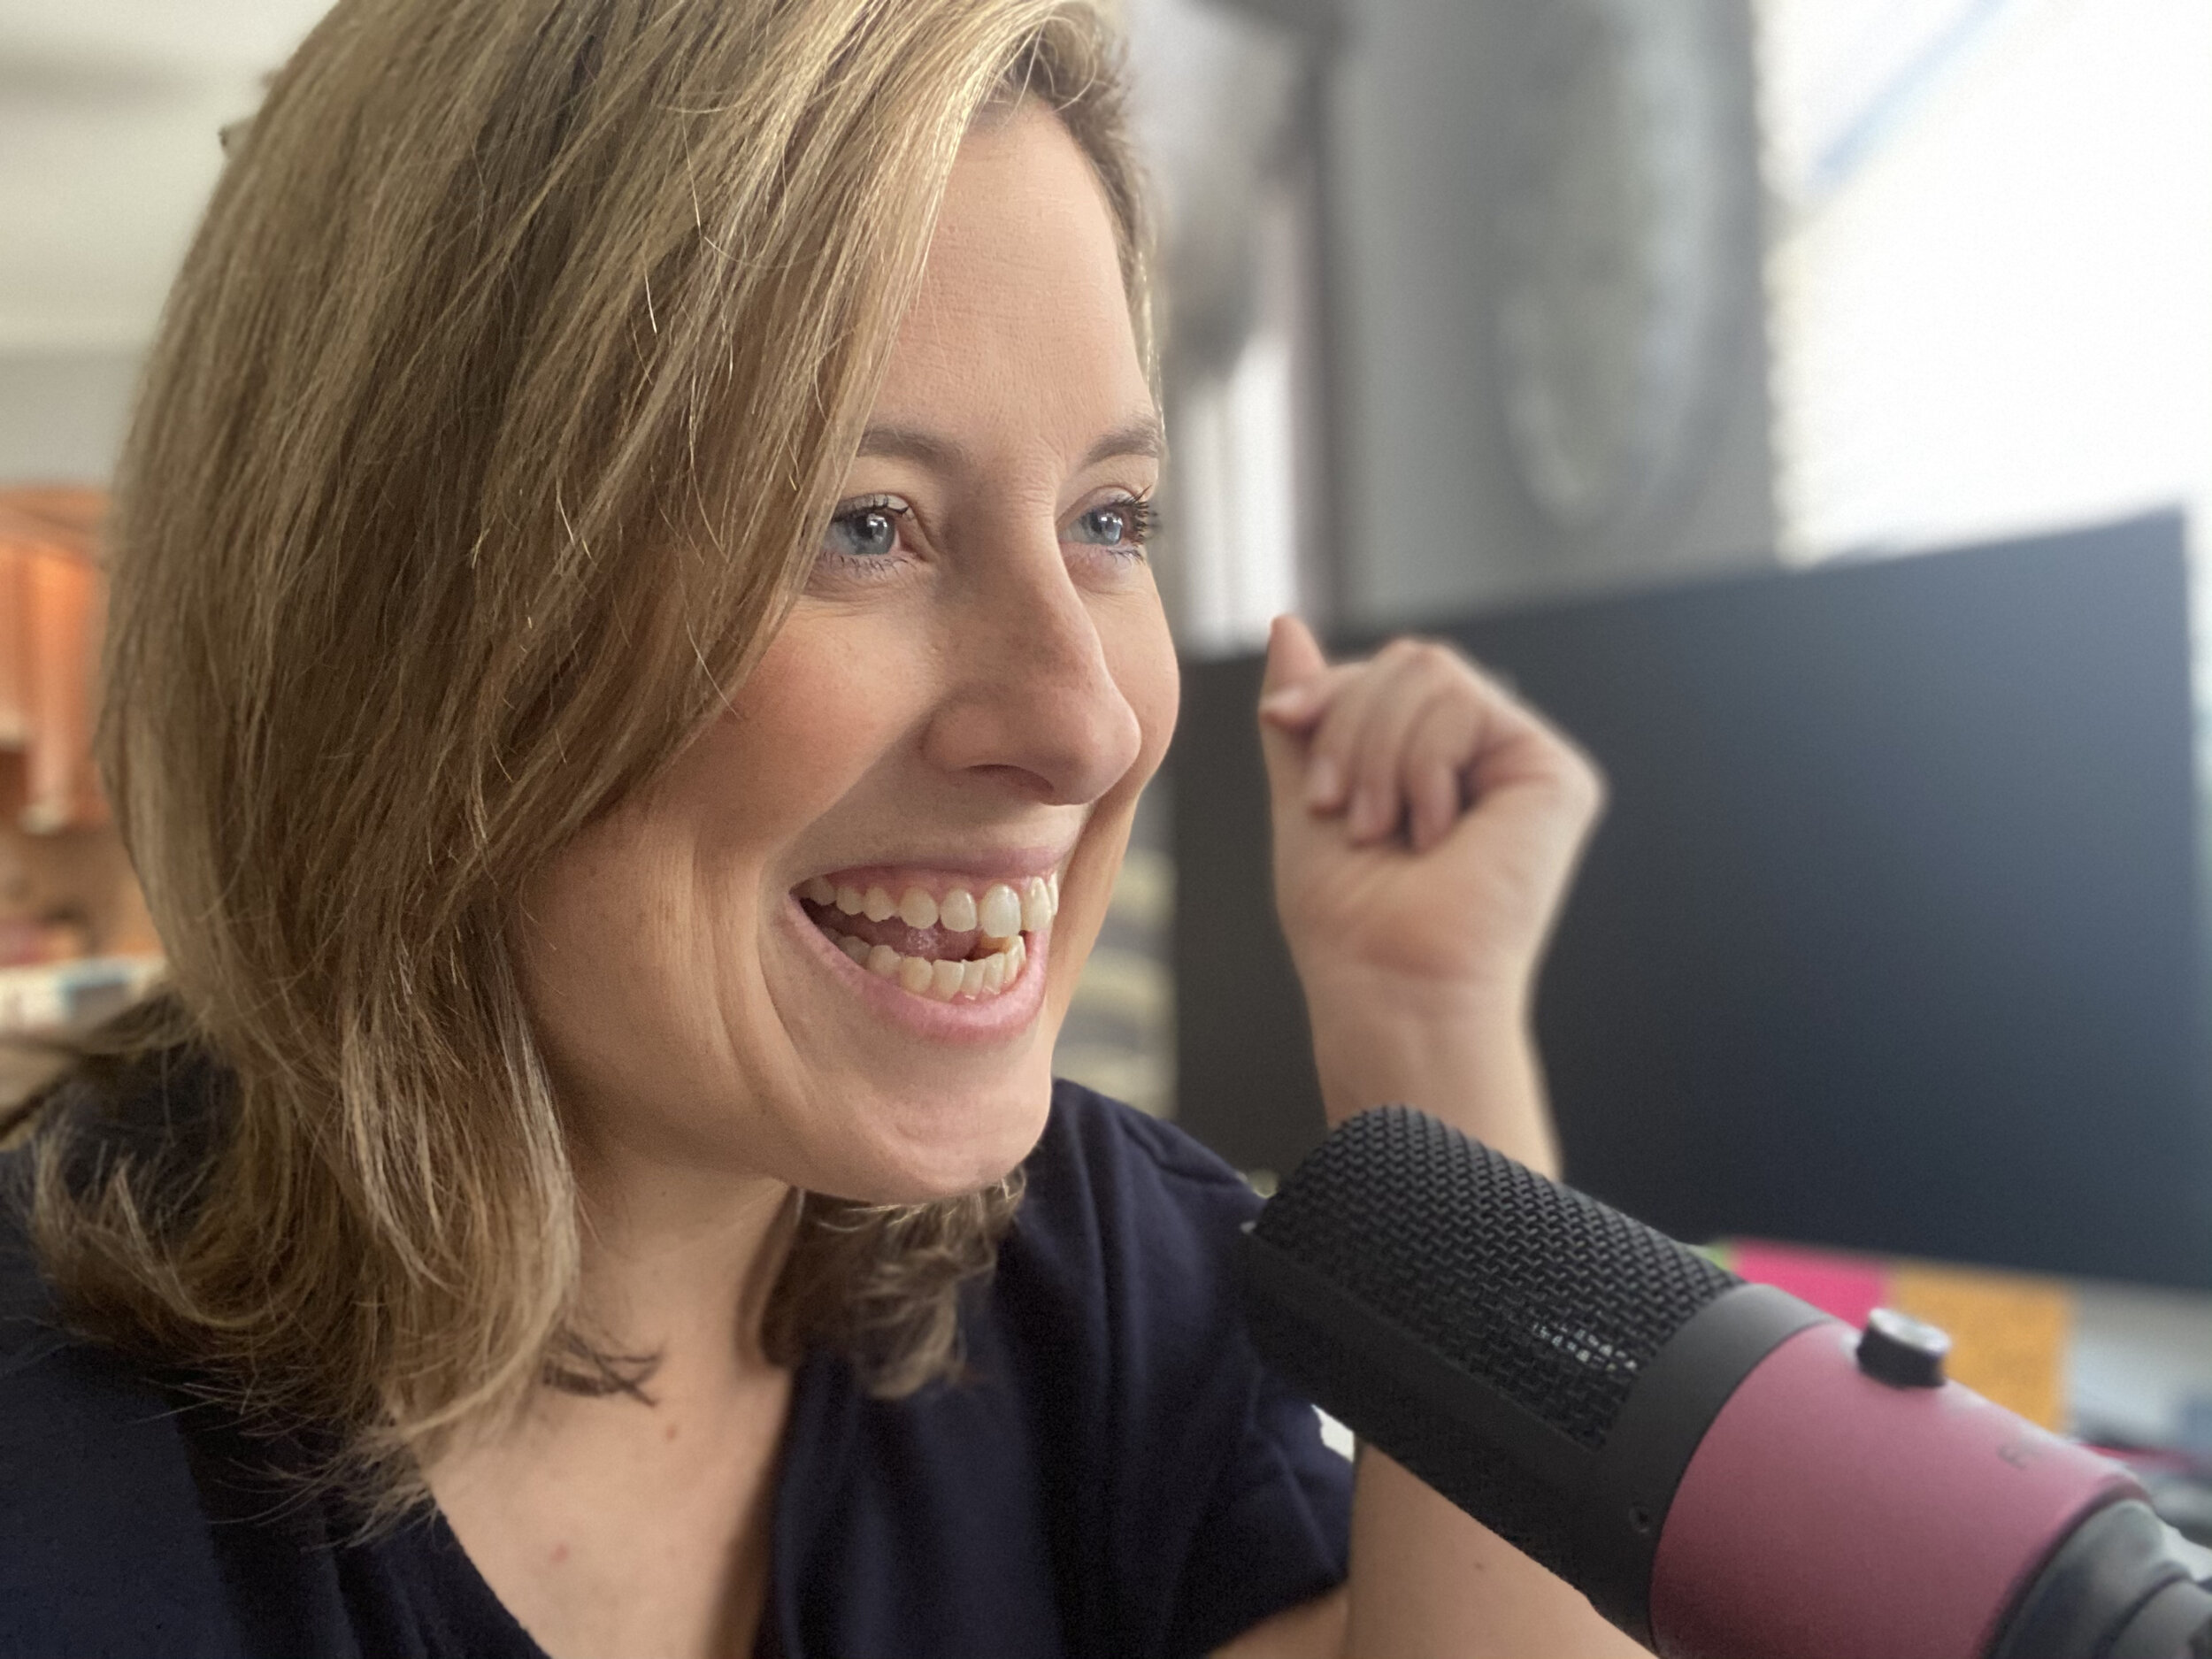 The Podcast - The conversations are far from over and their documentary proved the impact of storytelling. With her podcast, Jennifer, alongside other game-changers in the world of perinatal mental health, will continue allowing people to share their powerful narratives to let others know they’re not alone.  